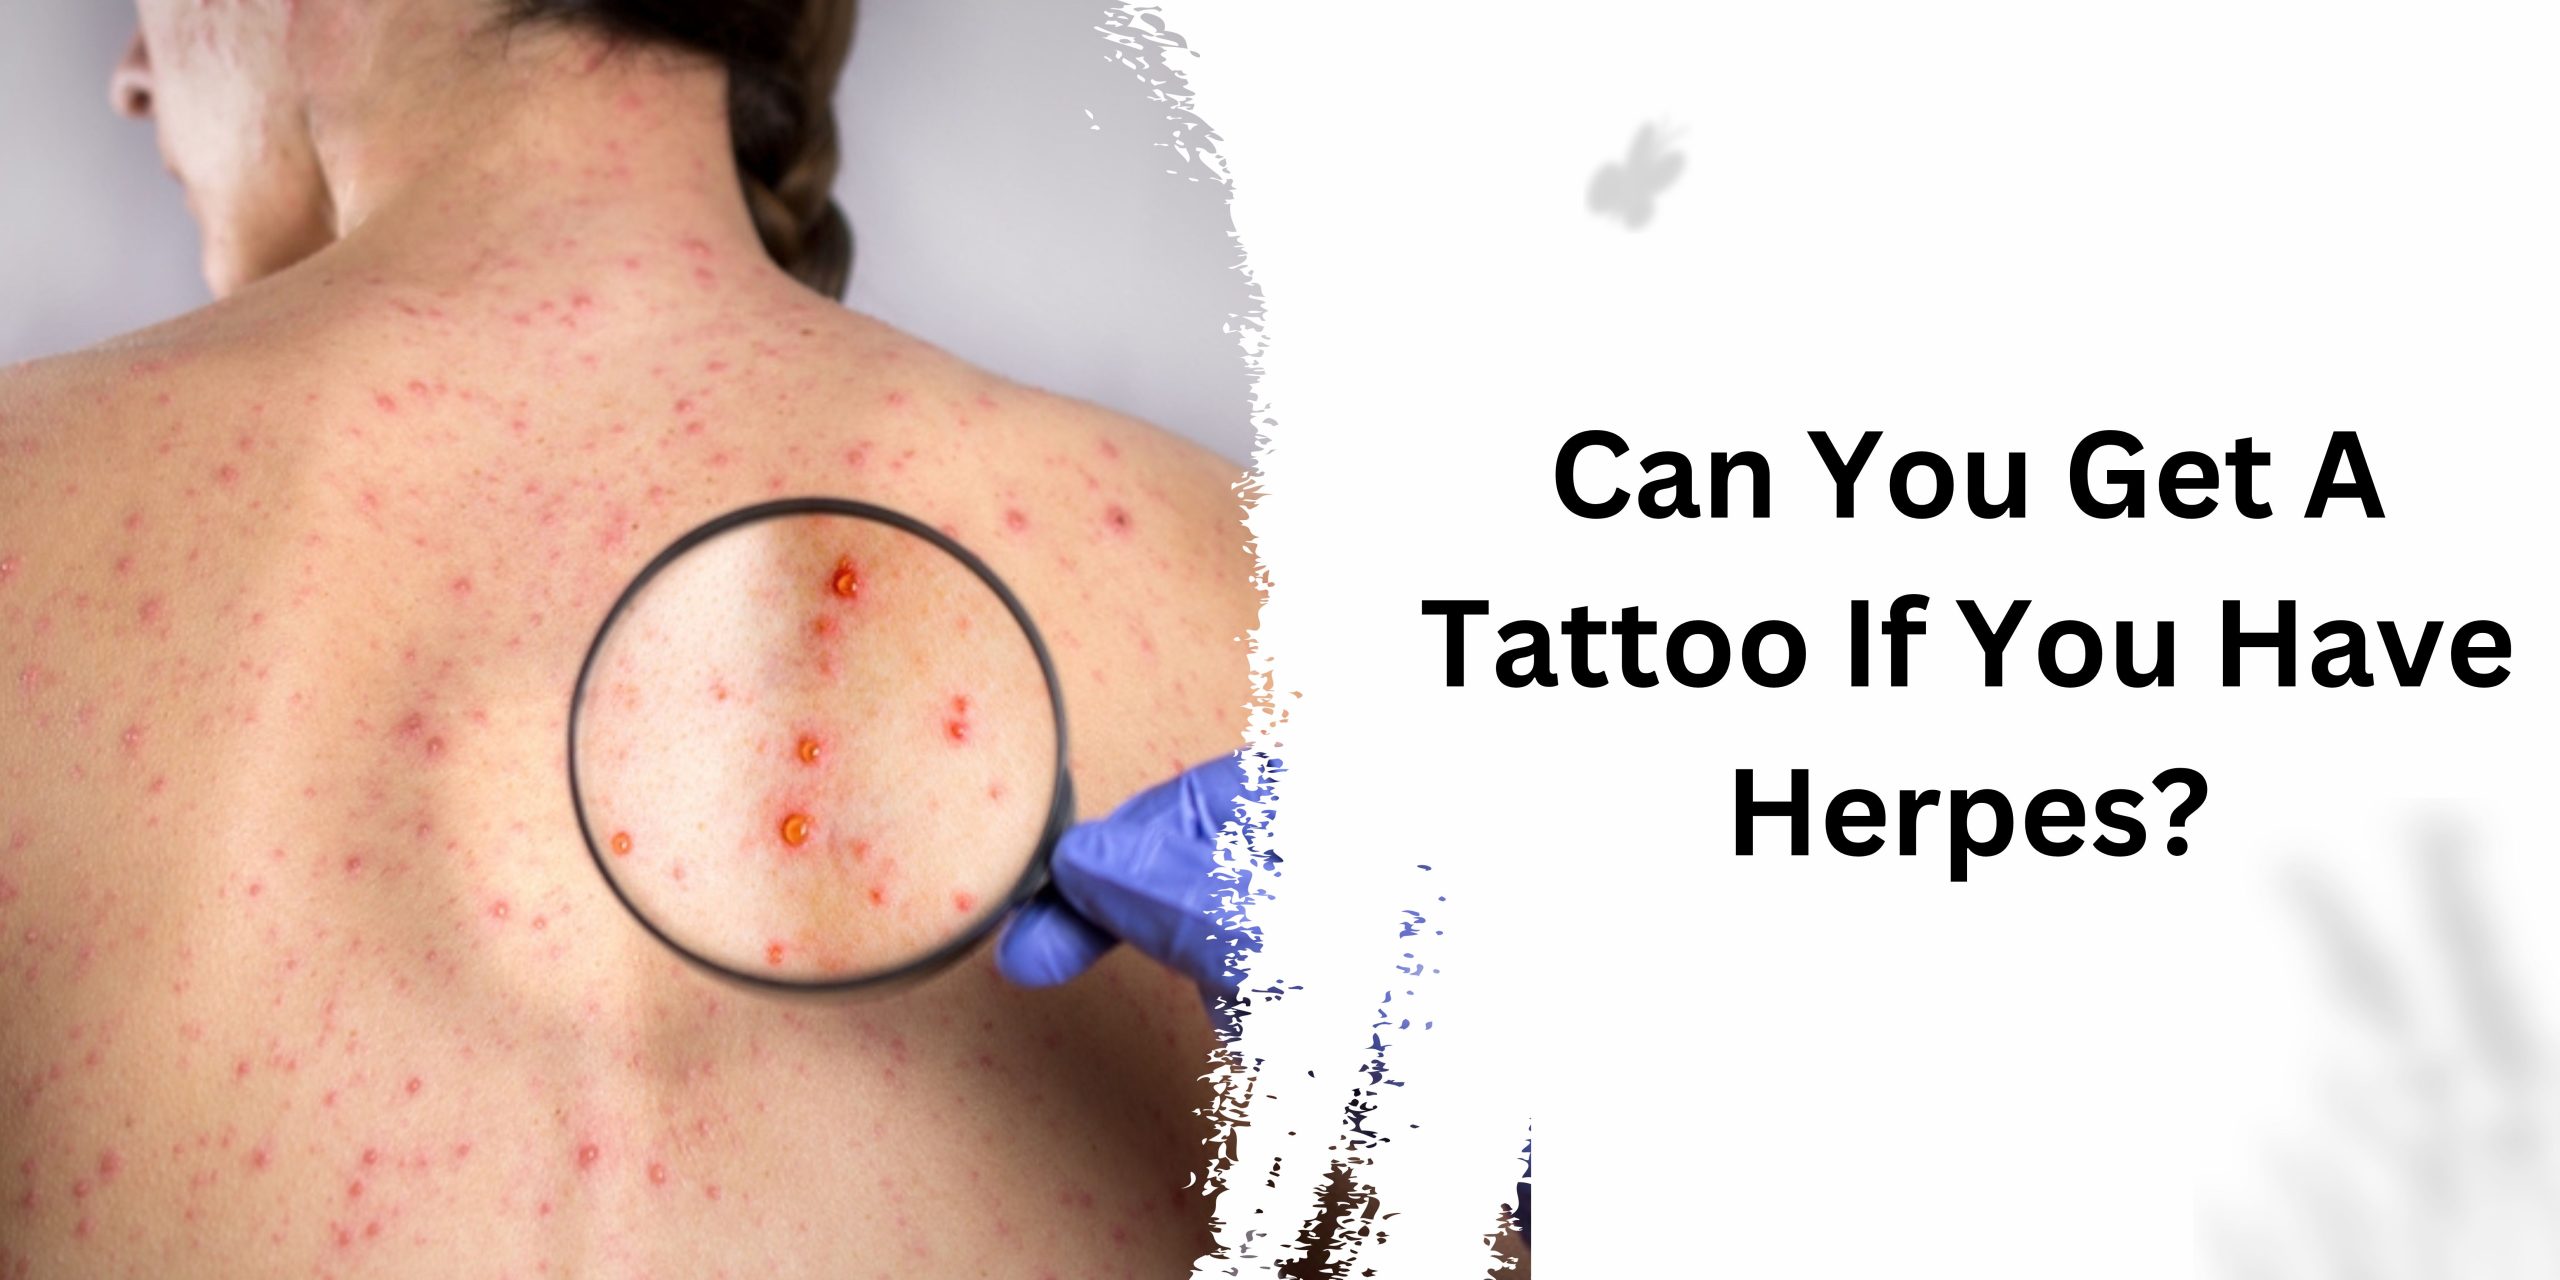 Can You Get A Tattoo If You Have Herpes